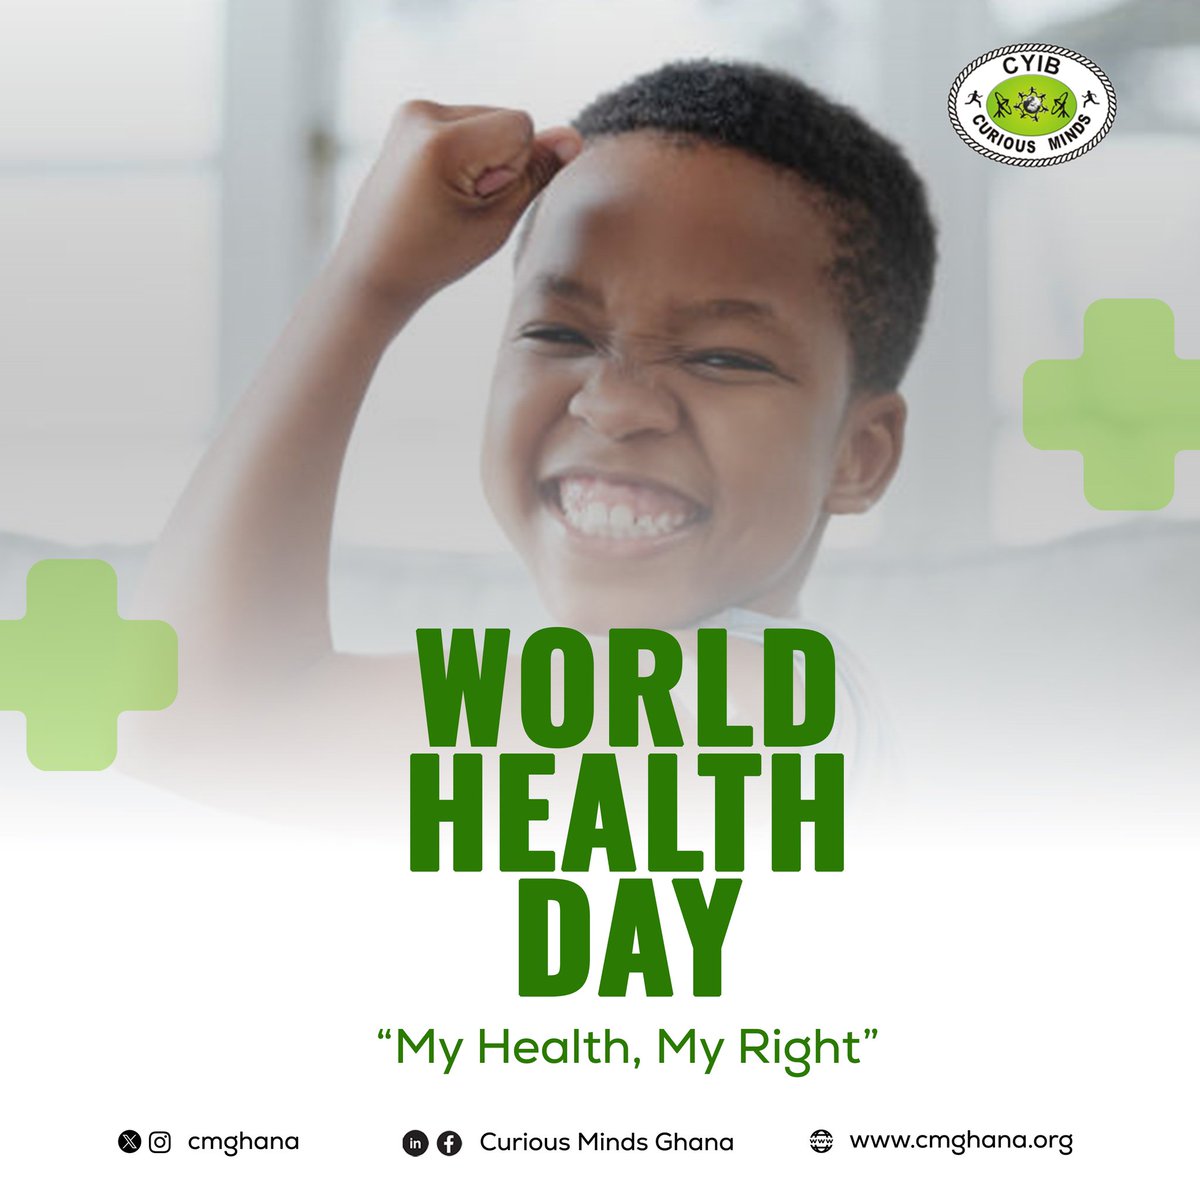 It’s #WorldHealthDay! A reminder that you have the right to: ⚕️safe and quality care, without any discrimination 📊privacy and confidentiality of your health information 🩺information about your treatment and to informed consent ✊🏾bodily autonomy and integrity #CMGhana #Health